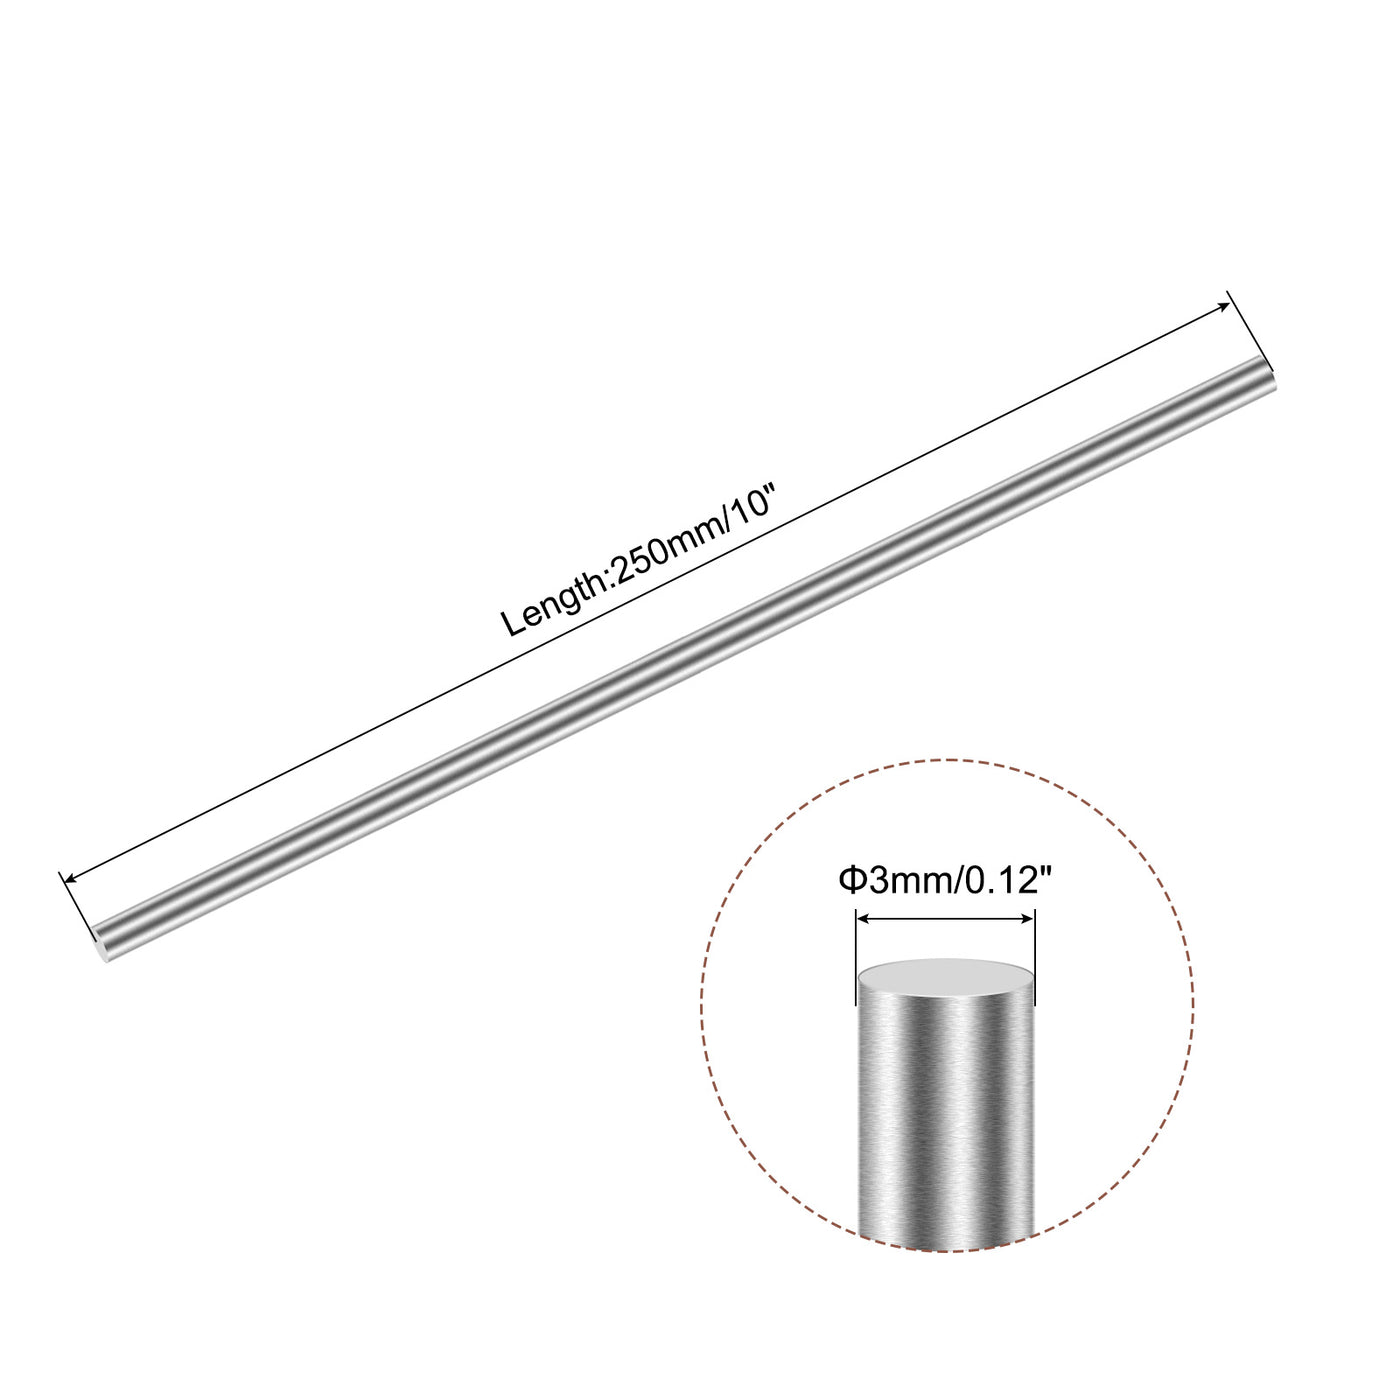 uxcell Uxcell 3mm x 250mm(1/8" x 10") 304 Stainless Steel Solid Round Rod for DIY Craft - 12pcs